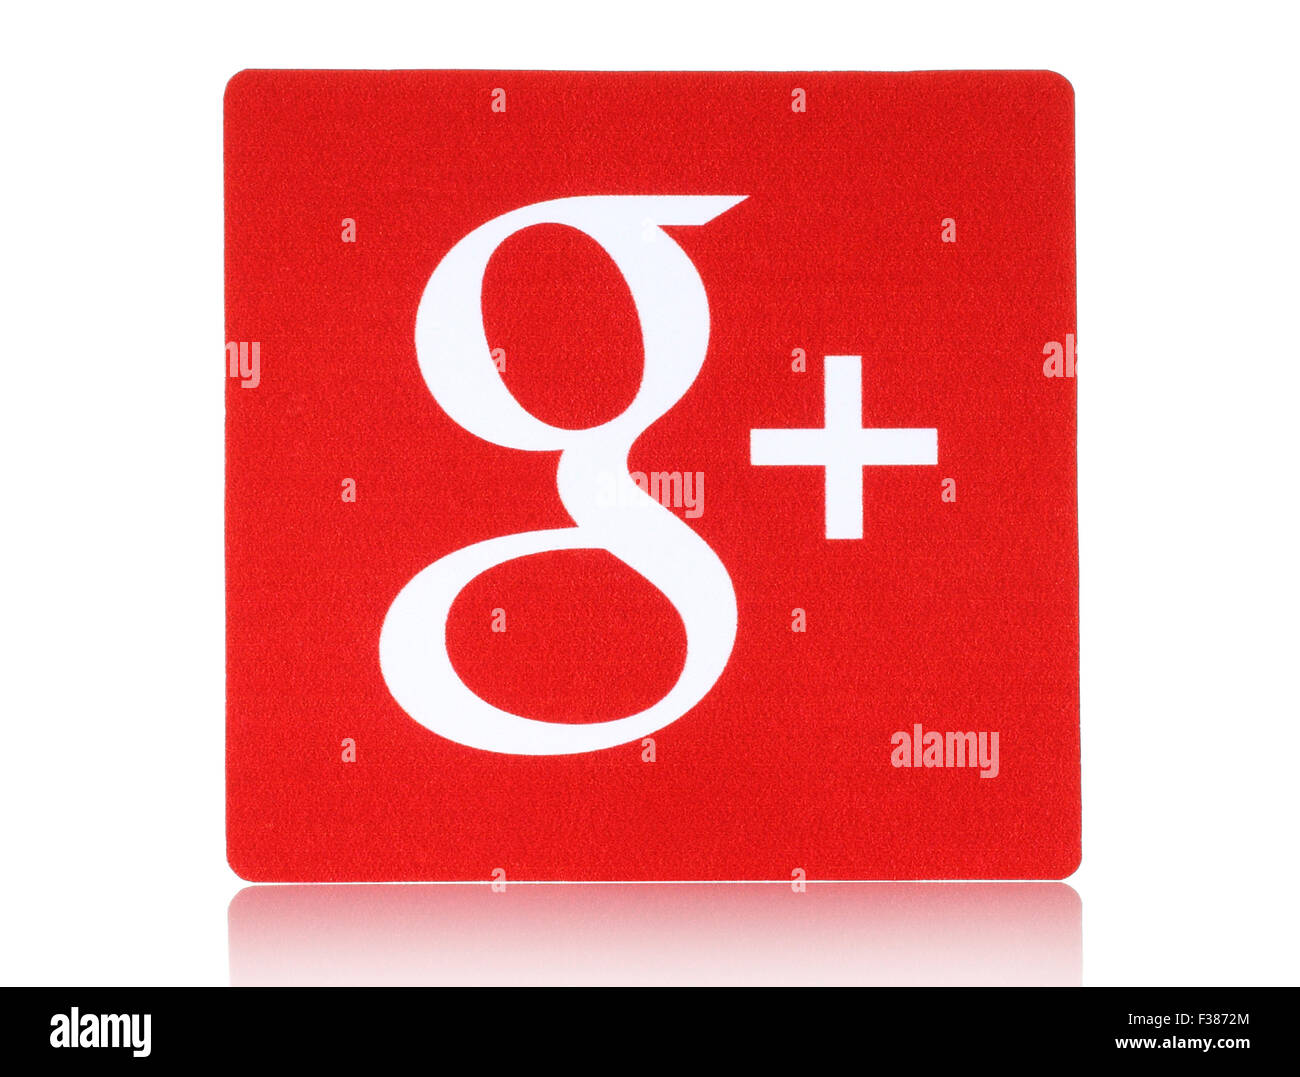 KIEV, UKRAINE - FEBRUARY 16, 2015:Google plus logotype printed on paper and placed on white background Stock Photo